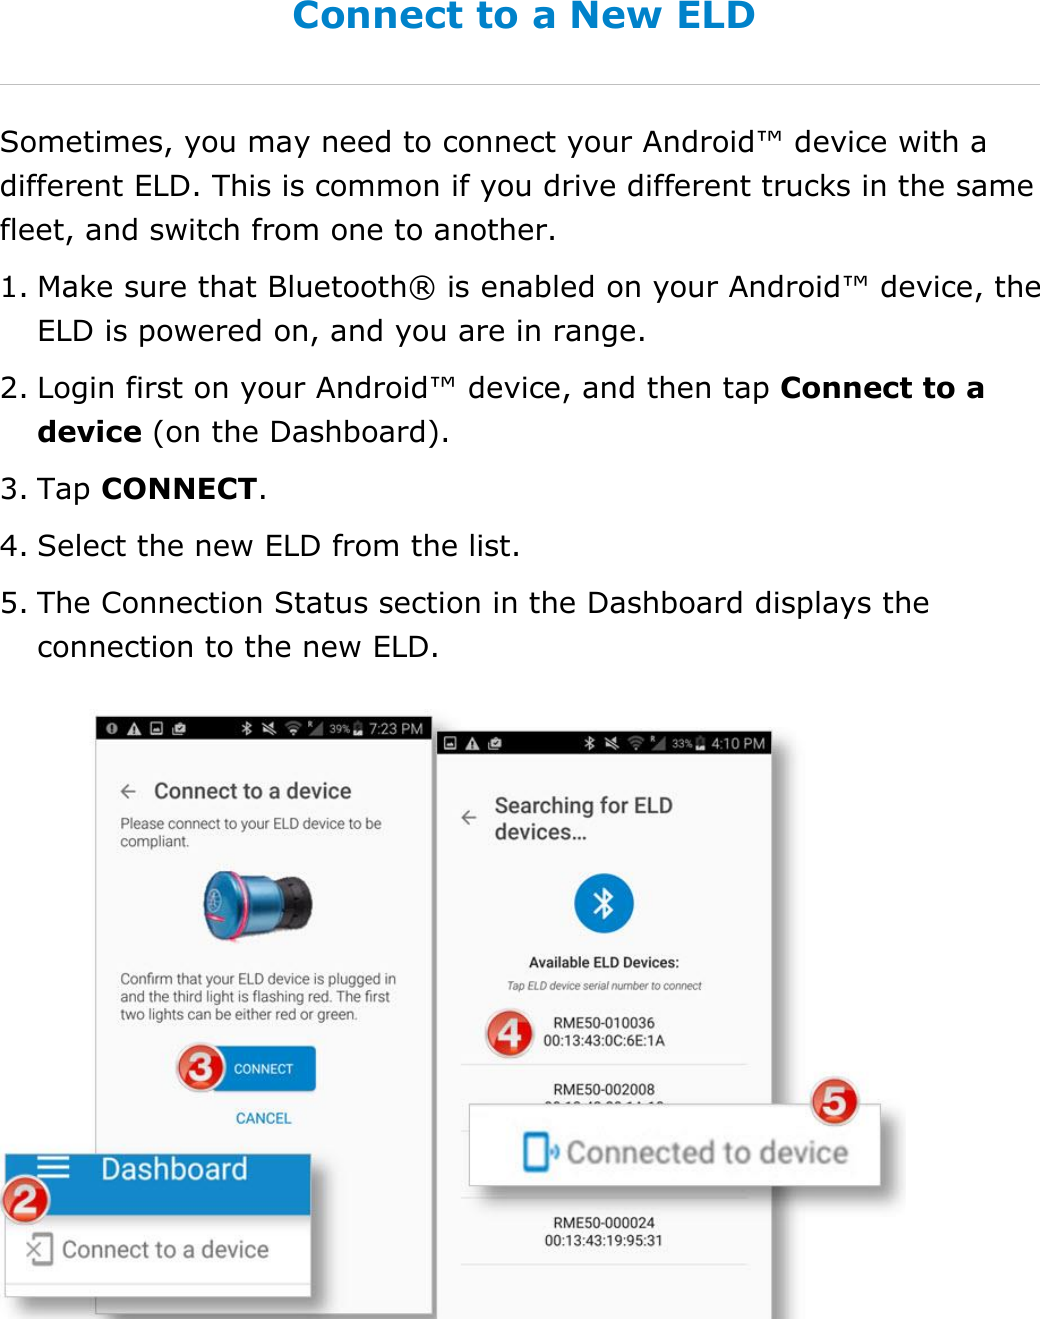 Set My Duty Status DriverConnect User Guide  17 © 2016-2017, Rand McNally, Inc. Connect to a New ELD Sometimes, you may need to connect your Android™ device with a different ELD. This is common if you drive different trucks in the same fleet, and switch from one to another. 1. Make sure that Bluetooth® is enabled on your Android™ device, the ELD is powered on, and you are in range. 2. Login first on your Android™ device, and then tap Connect to a device (on the Dashboard). 3. Tap CONNECT. 4. Select the new ELD from the list. 5. The Connection Status section in the Dashboard displays the connection to the new ELD.  